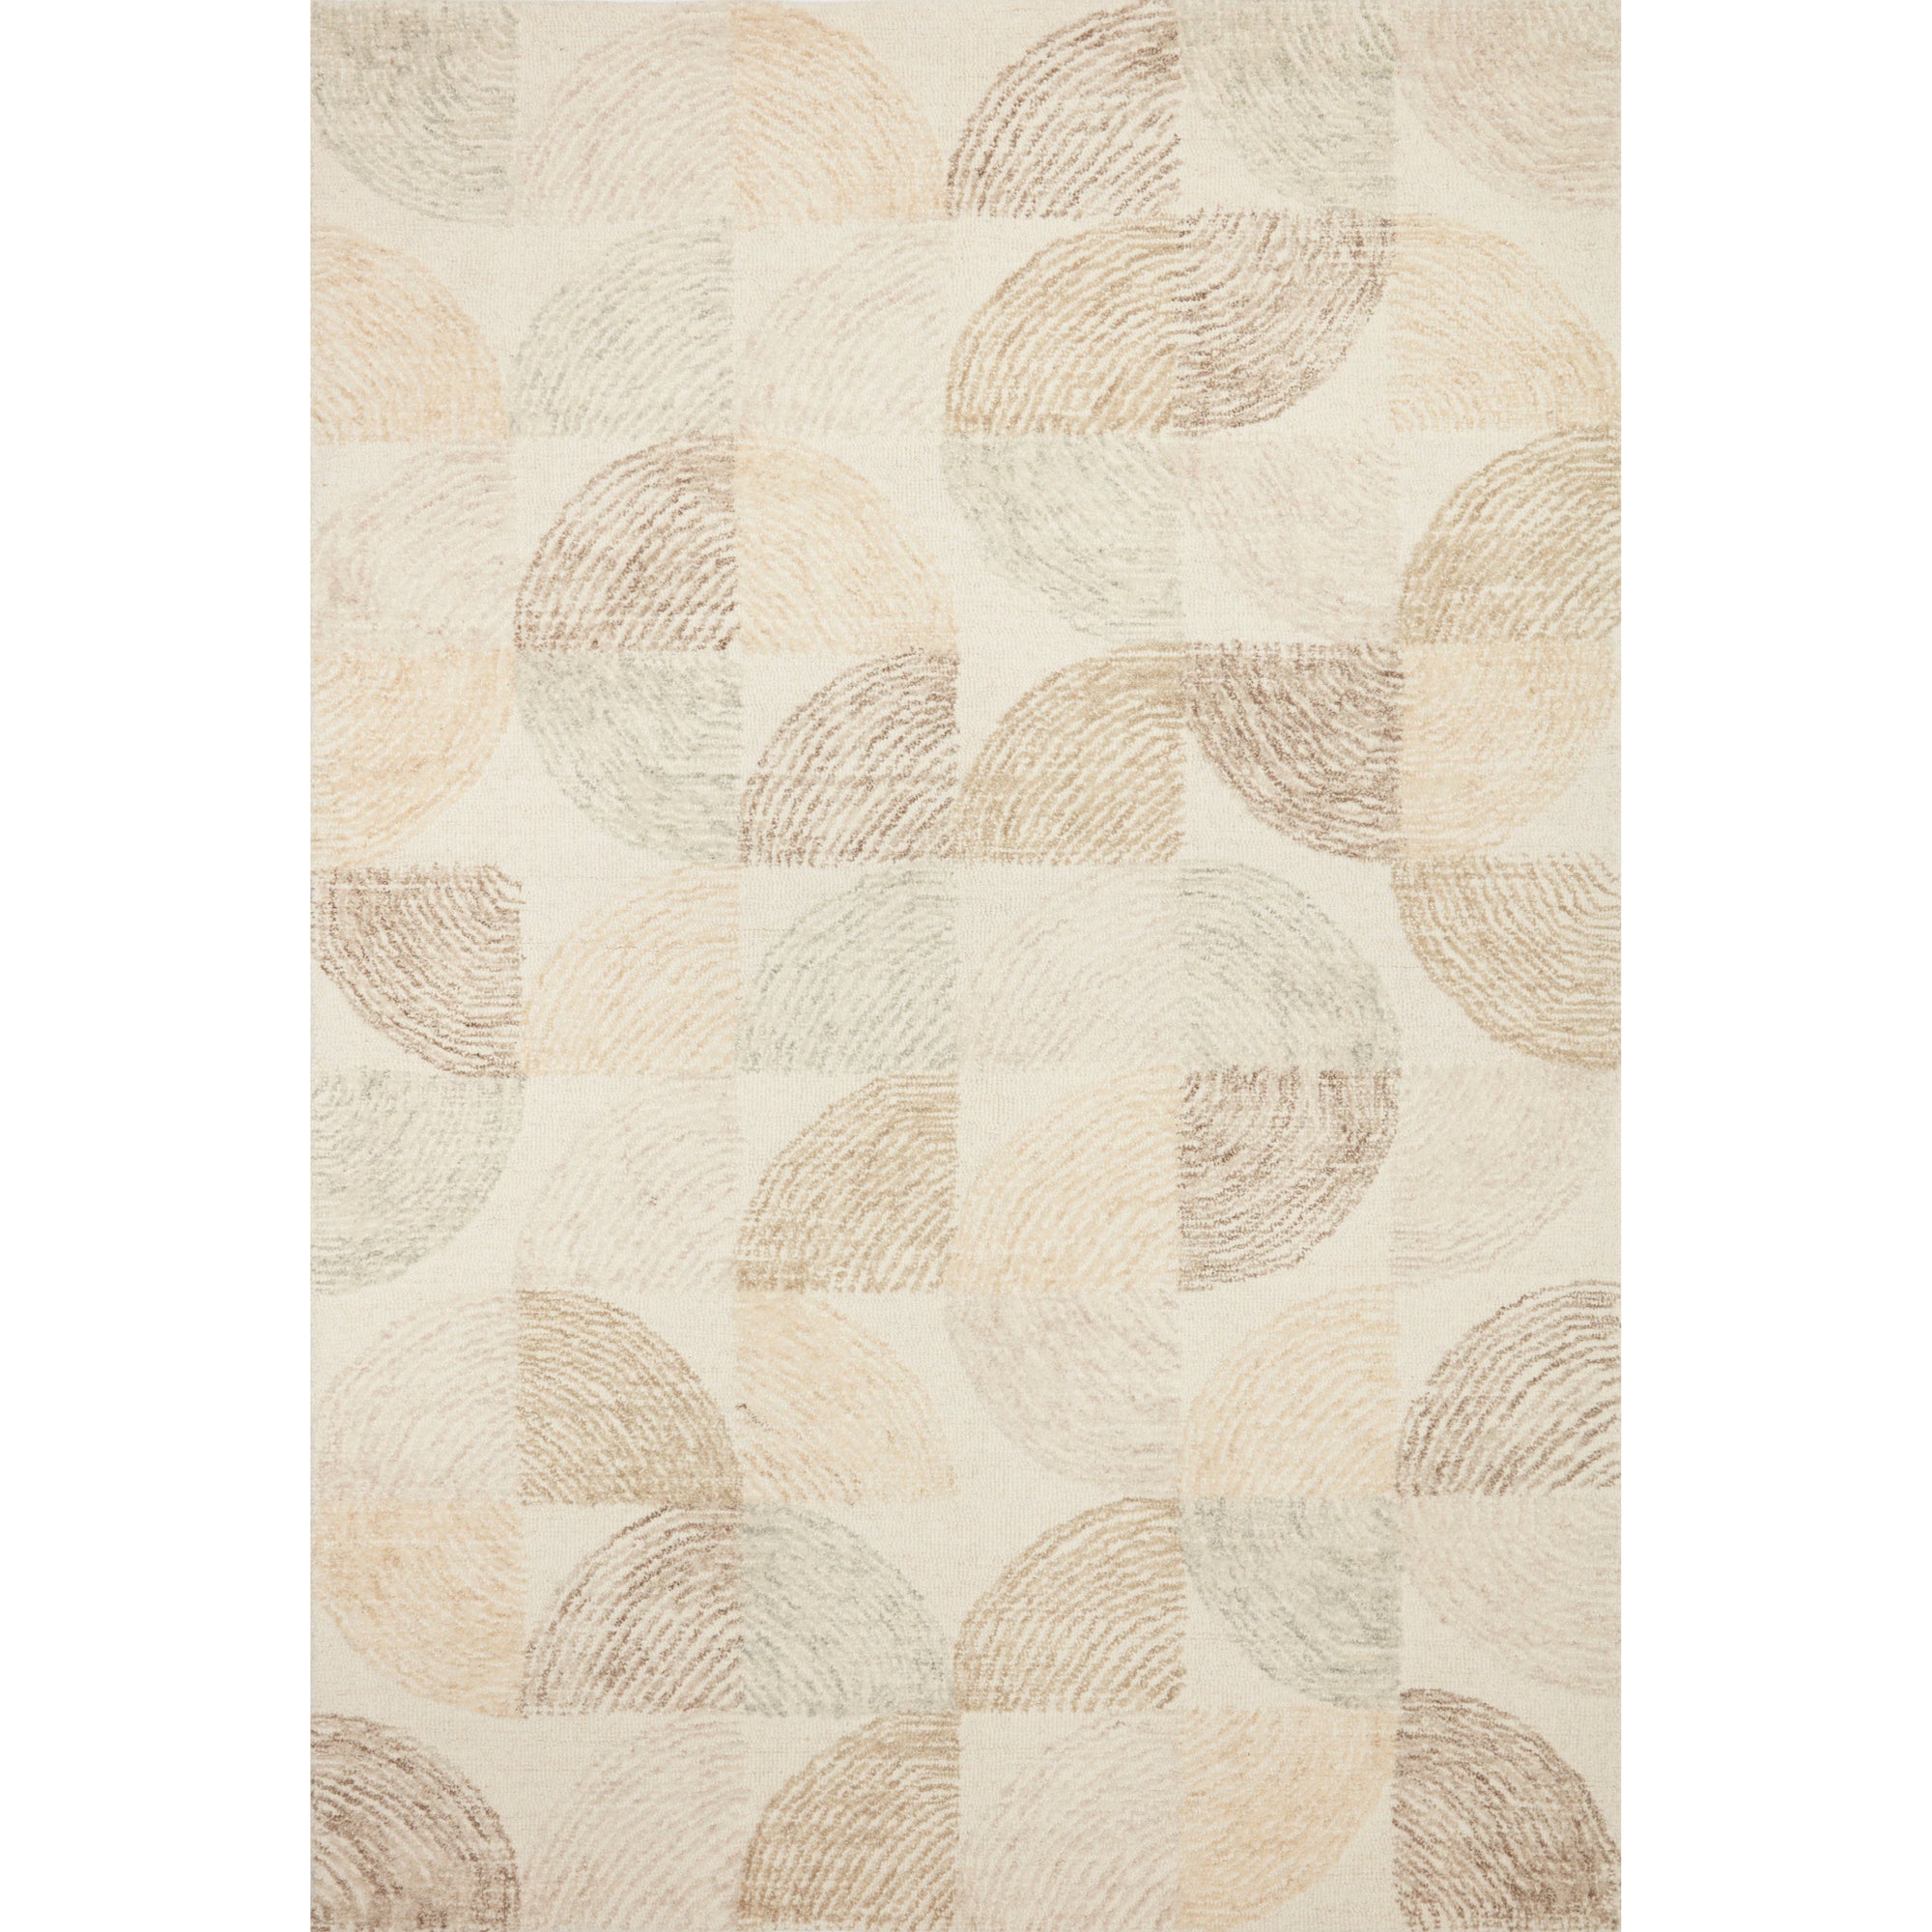 Rugs by Roo Loloi Milo Pebble Multi Area Rug in size 18" x 18" Sample